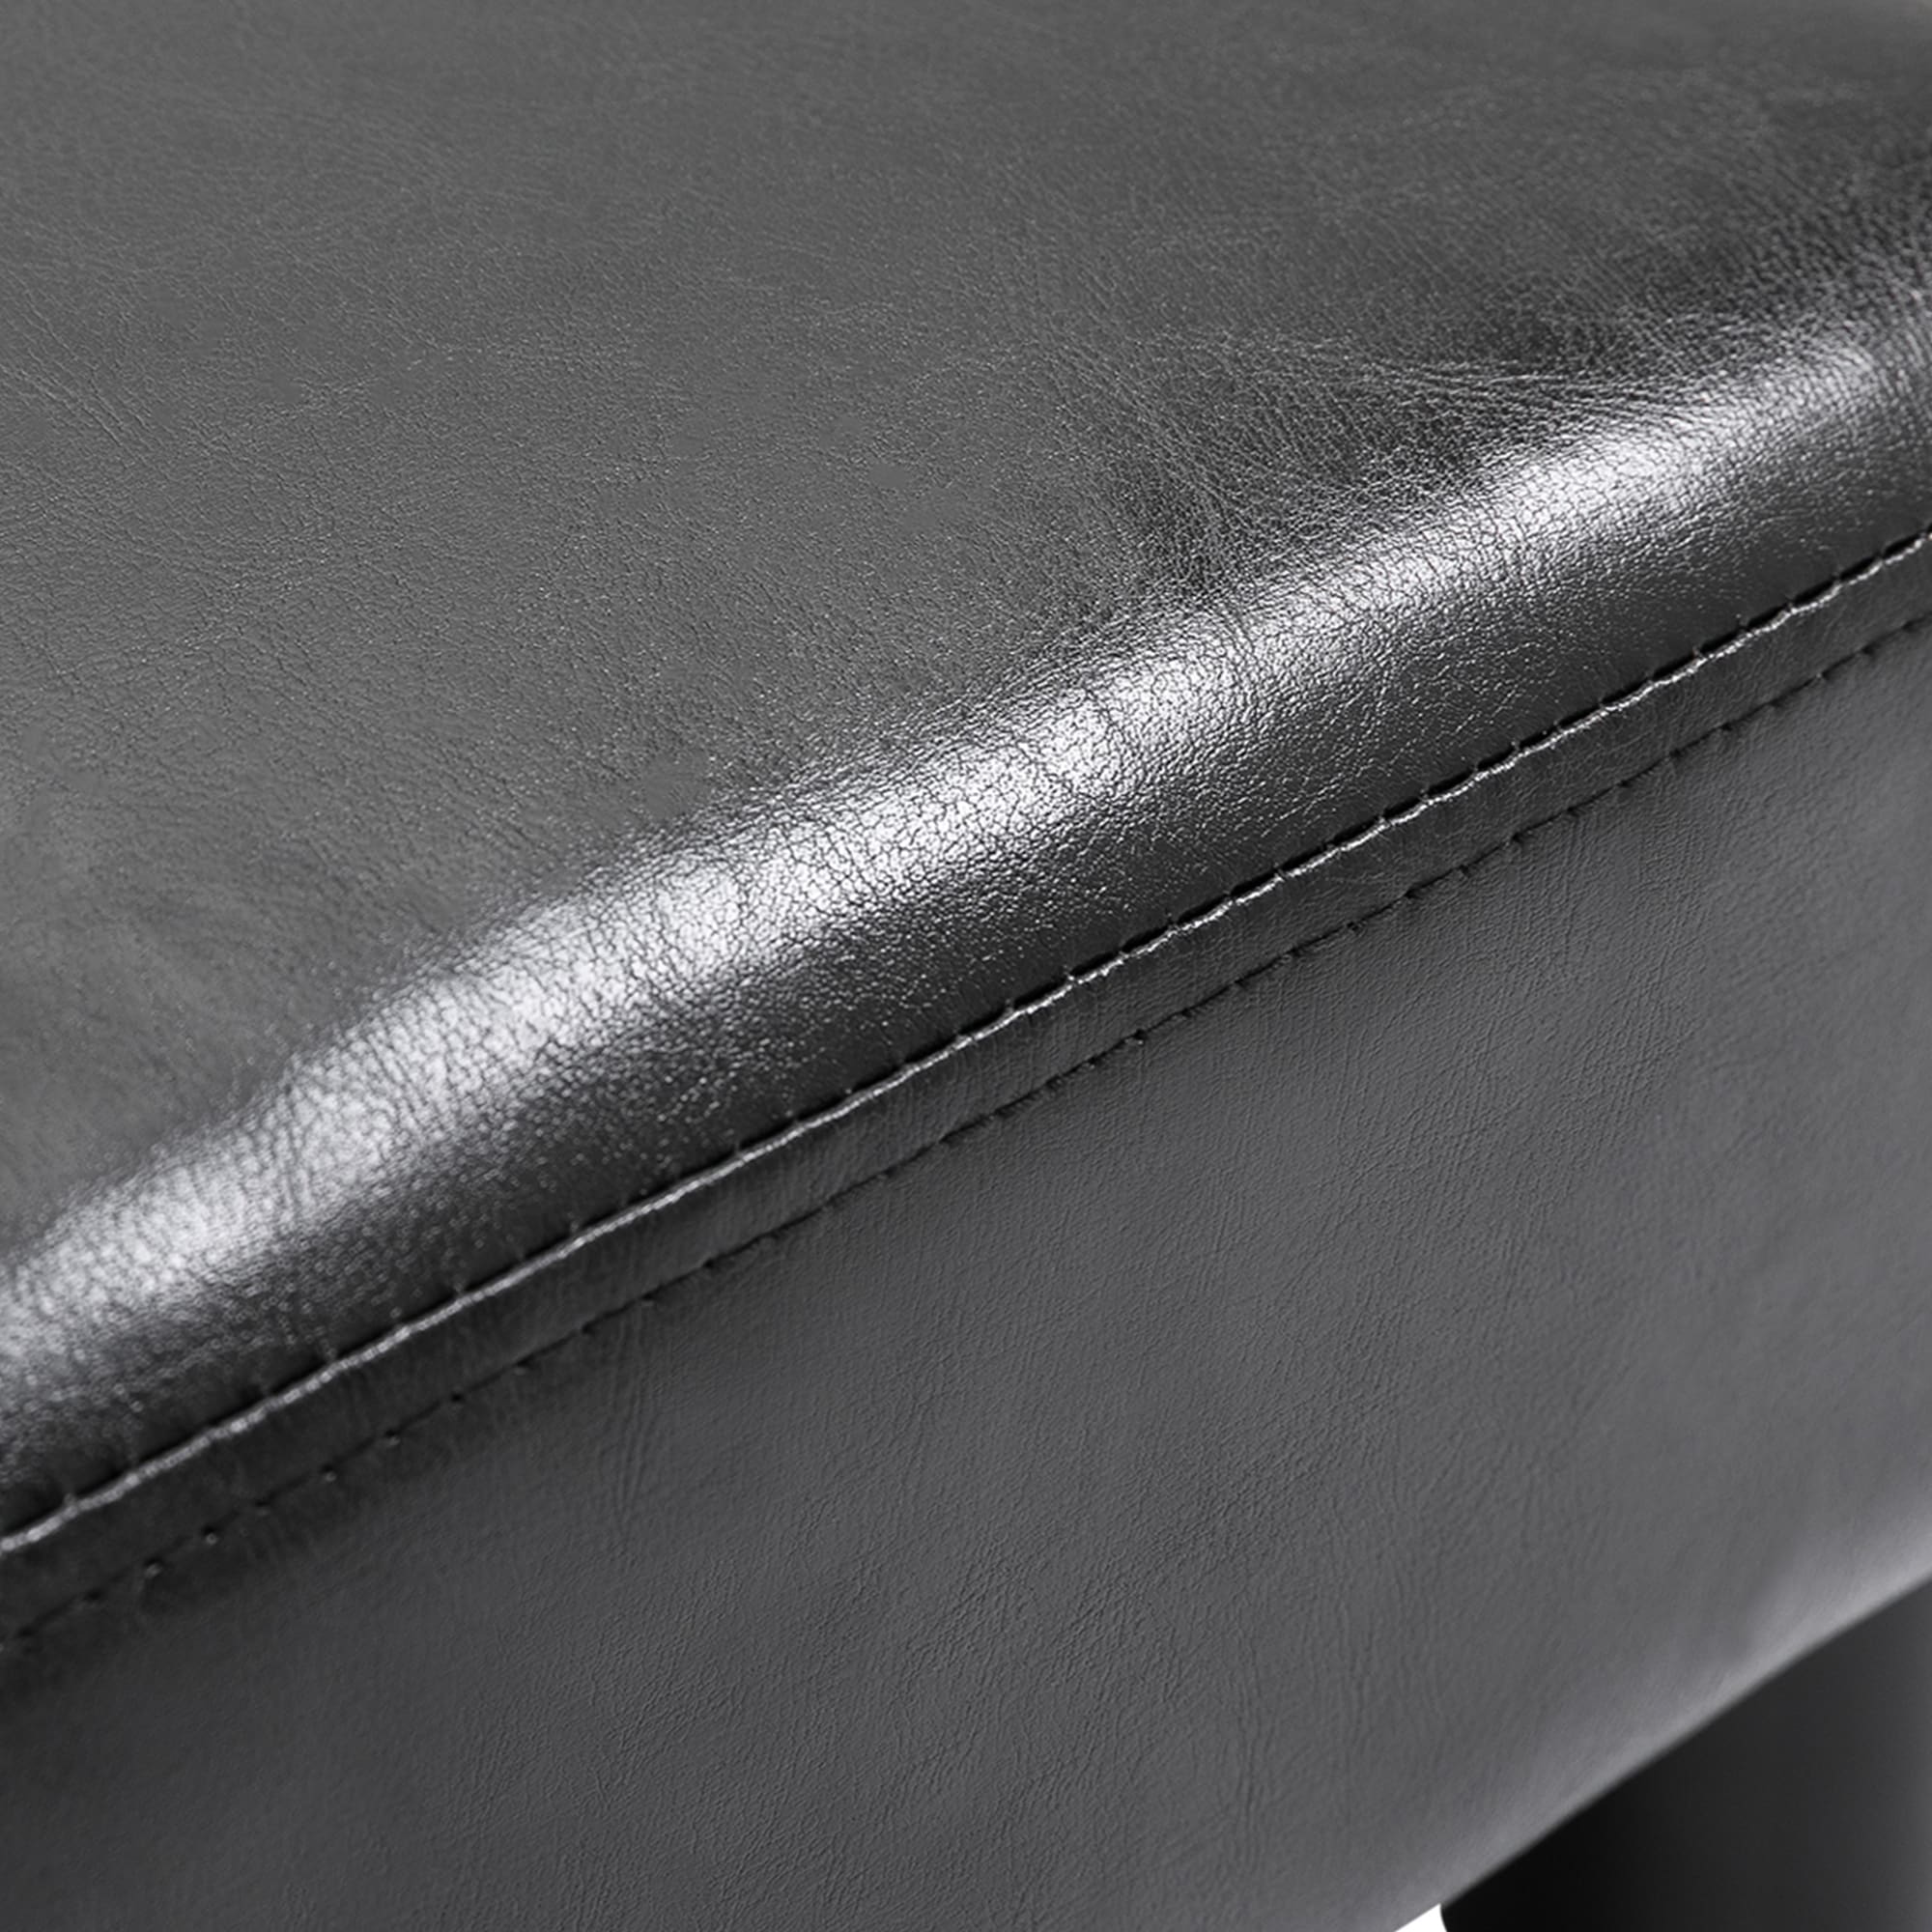 https://ak1.ostkcdn.com/images/products/is/images/direct/ba0938643c1a68184acc56f2317cca57a9c32ed1/HOMCOM-Modern-Faux-Leather-Upholstered-Rectangular-Ottoman-Footrest-with-Padded-Foam-Seat-and-Plastic-Legs.jpg